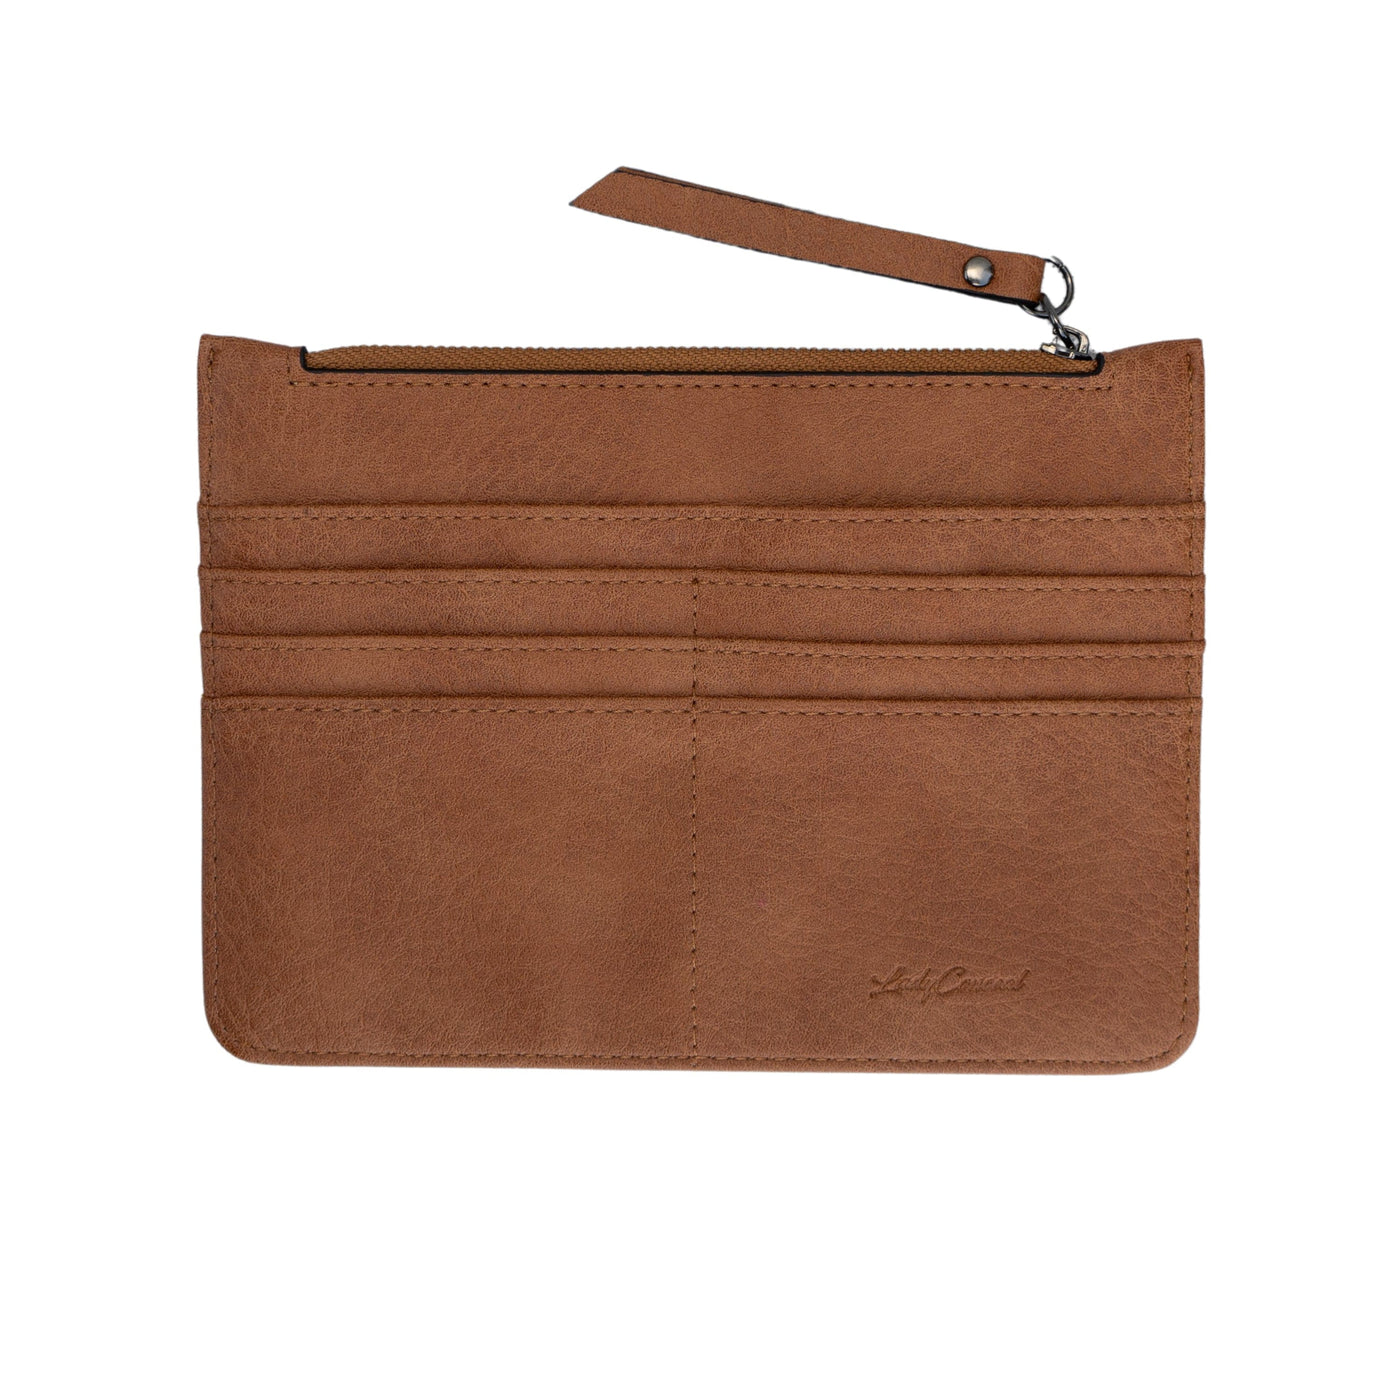 Concealed Carry Kinsley Crossbody with RFID Slim Wallet - Lady Conceal - Concealed Carry Purse - Lady Conceal